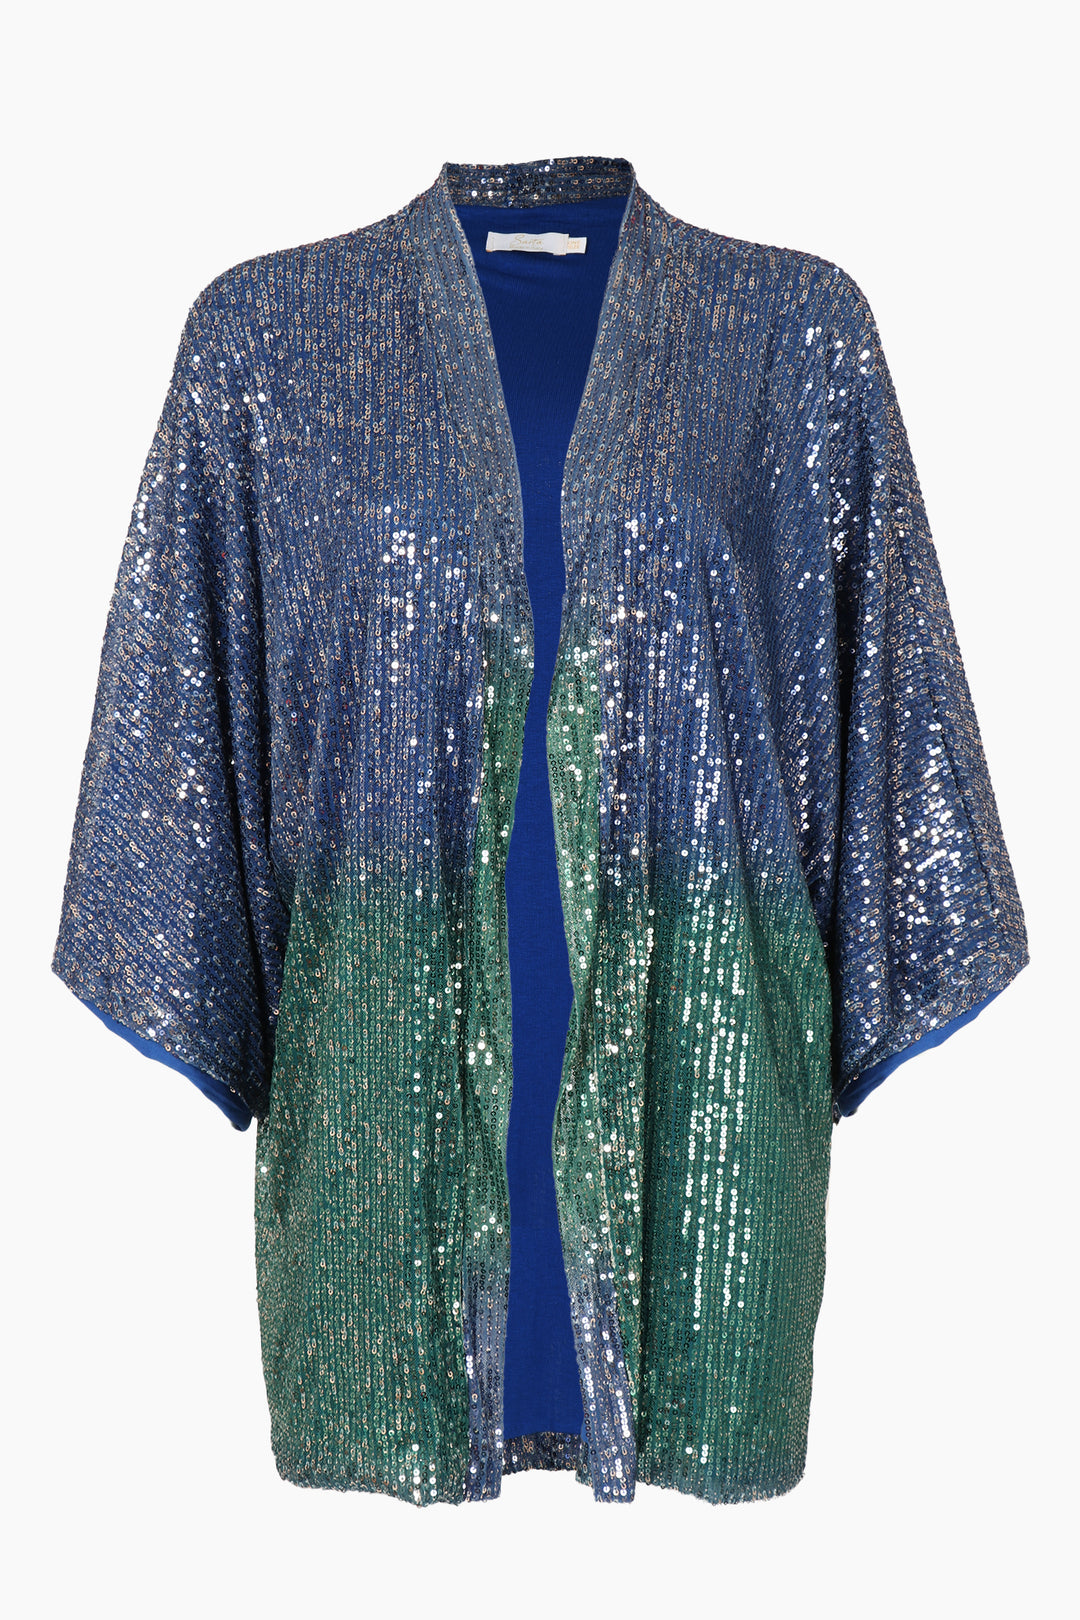 blue and green sparkly sequin womens kimono jacket 